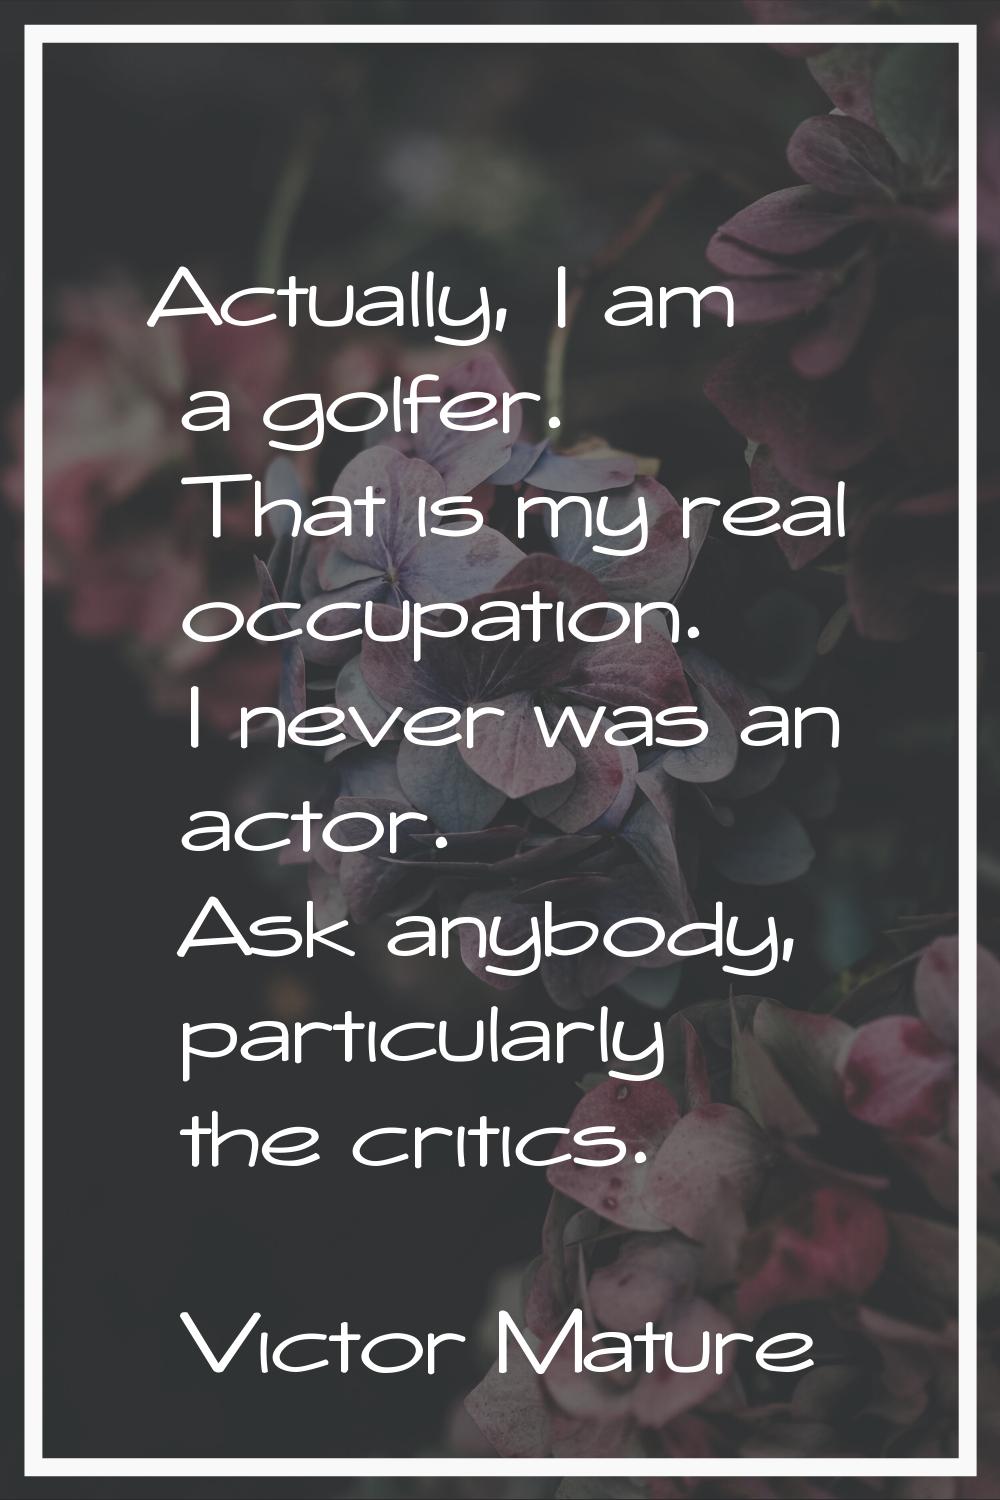 Actually, I am a golfer. That is my real occupation. I never was an actor. Ask anybody, particularl